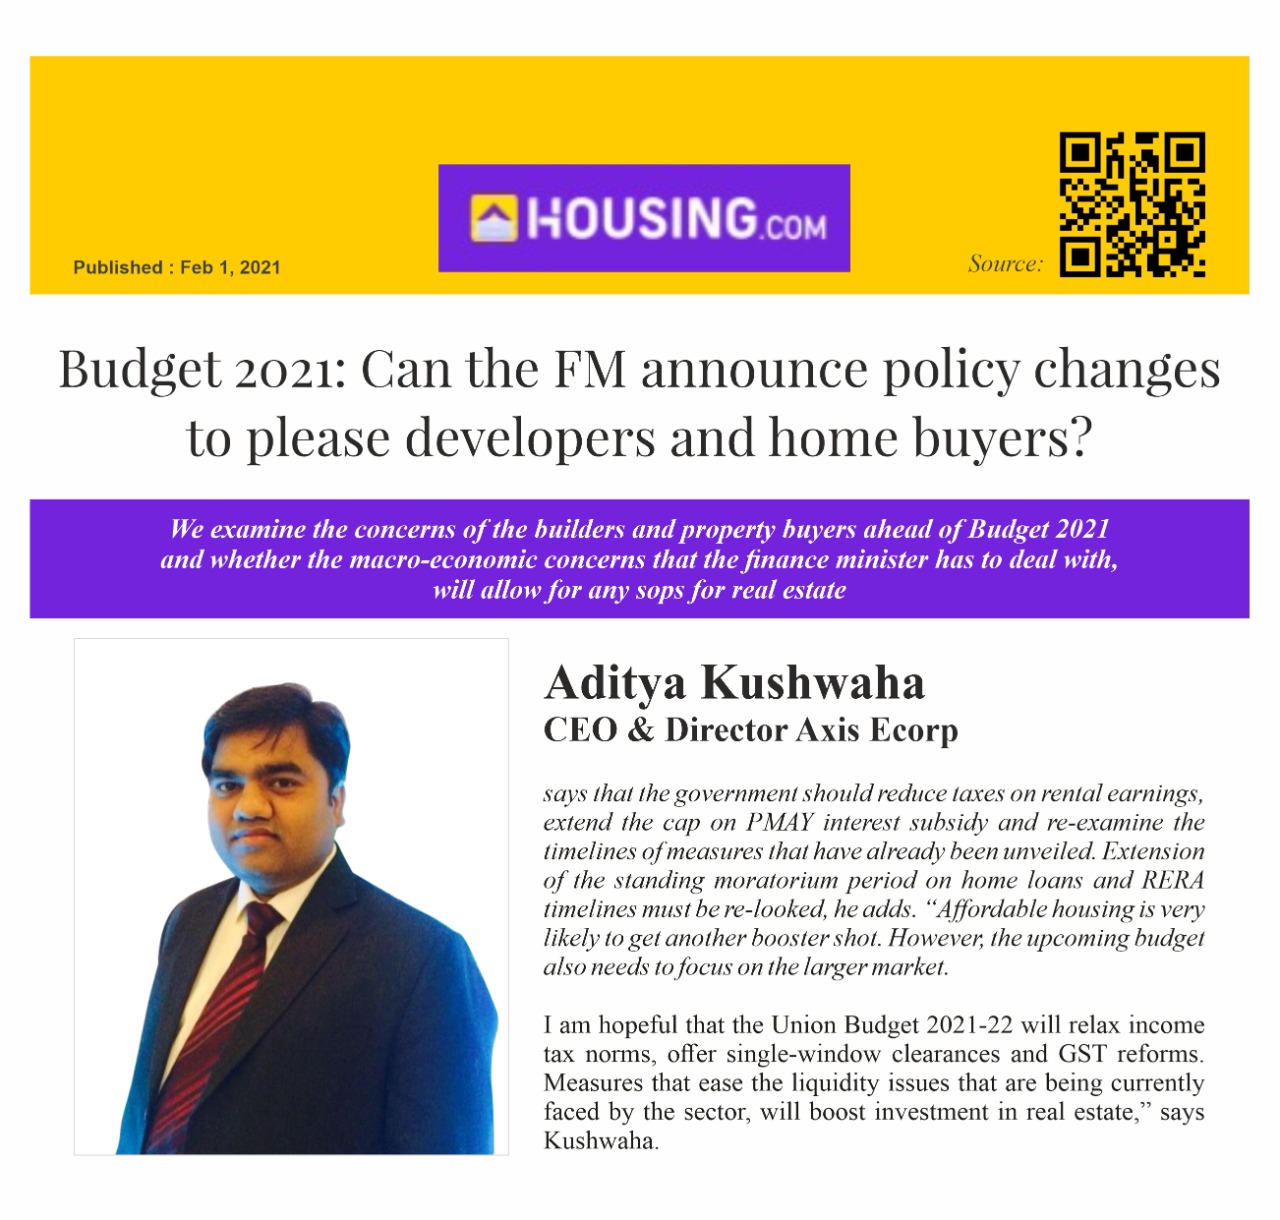 Can the FM announce policy changes to please developers and home buyers